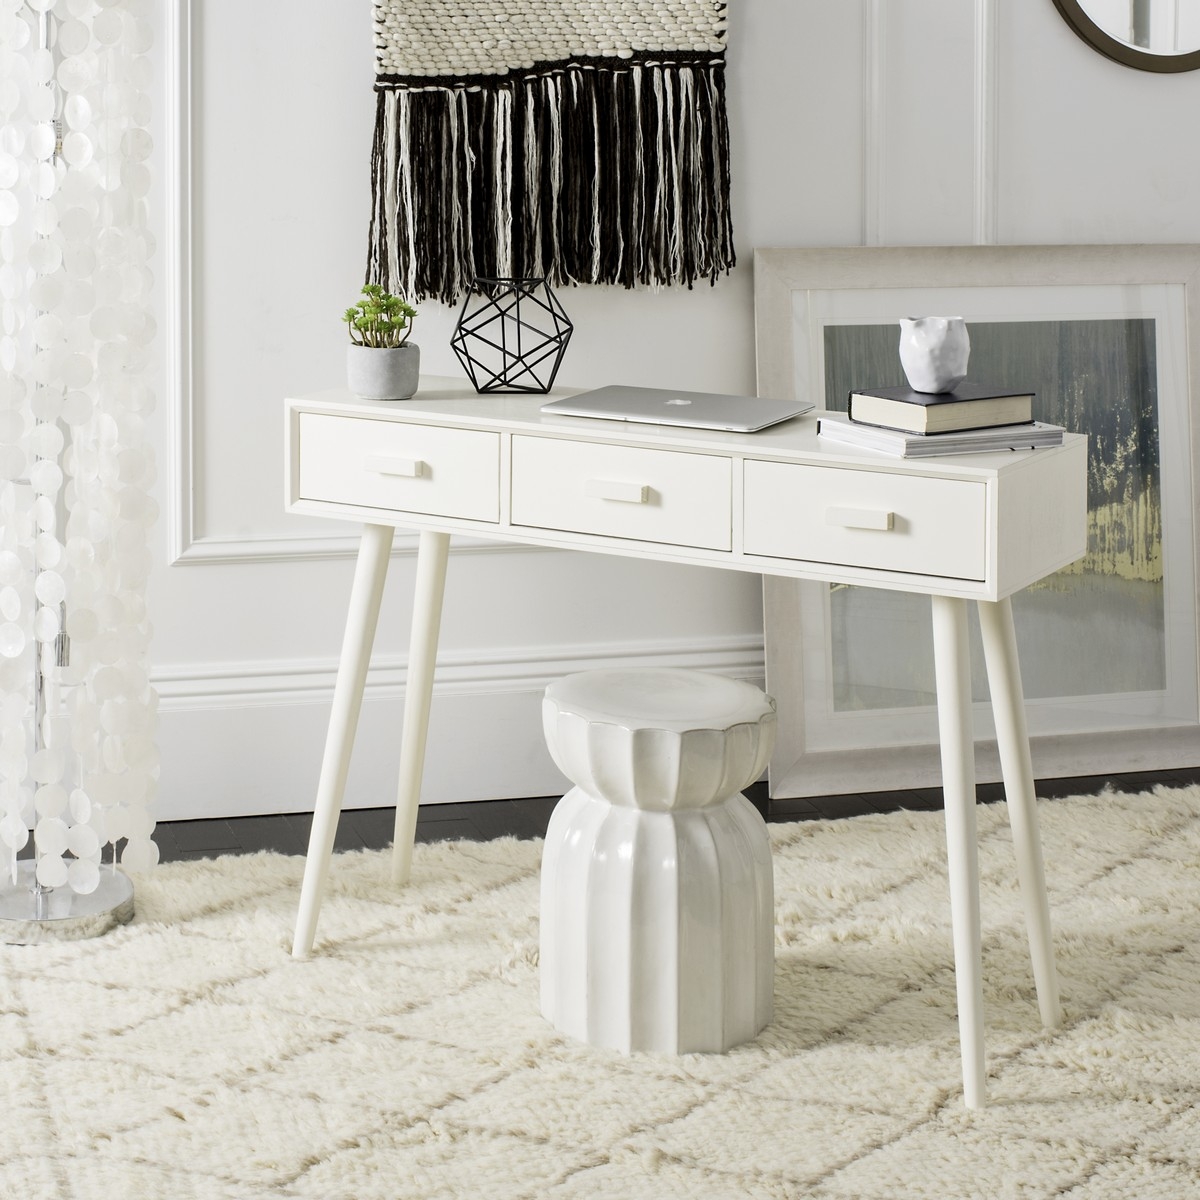 Albus 3 Drawer Console Table - Antique/White - Arlo Home - Image 2